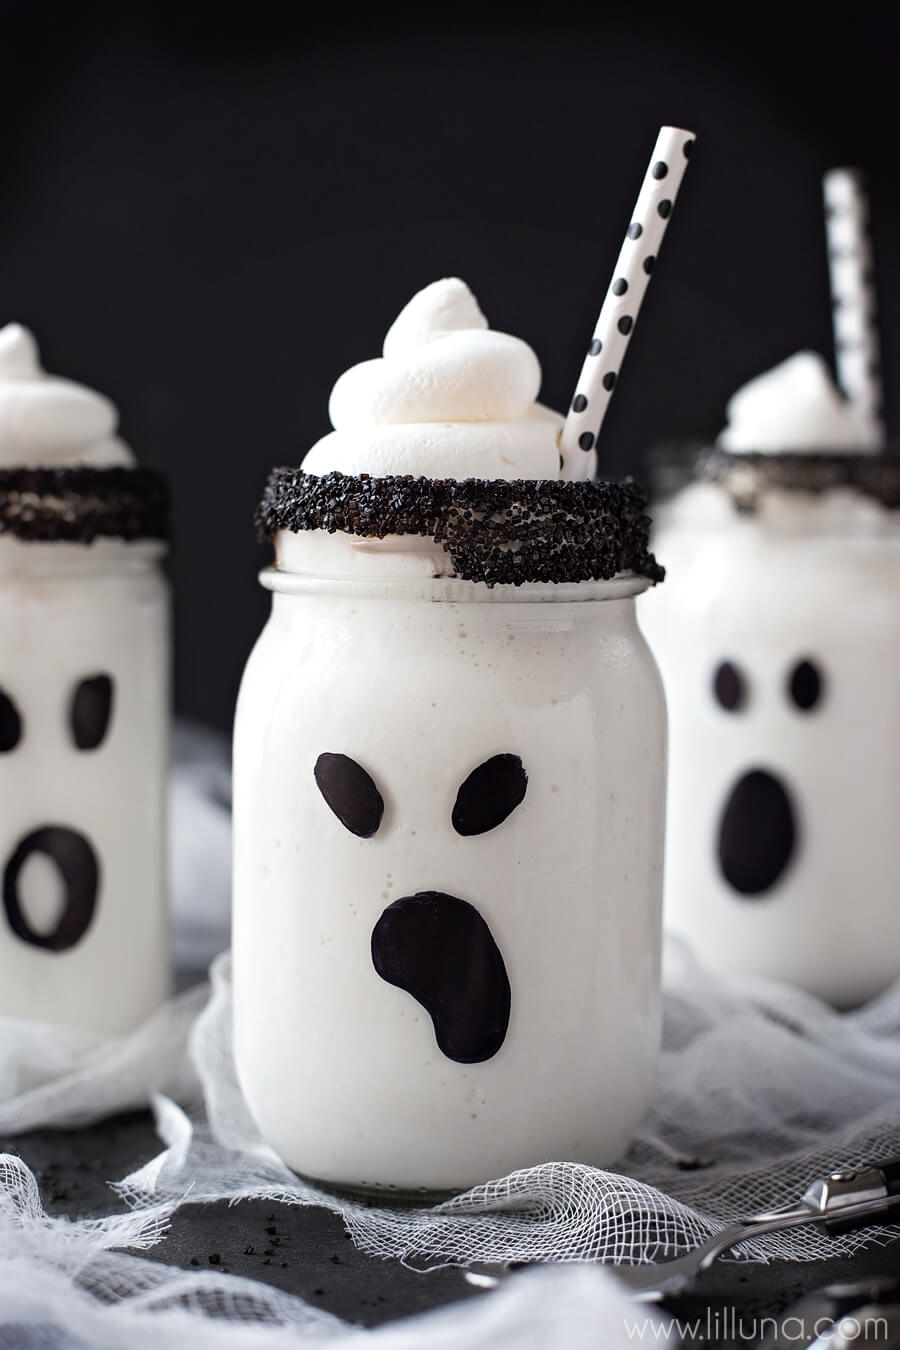 30 Most Delicious And Spooky Halloween Recipes For 2017  Festival Around the World